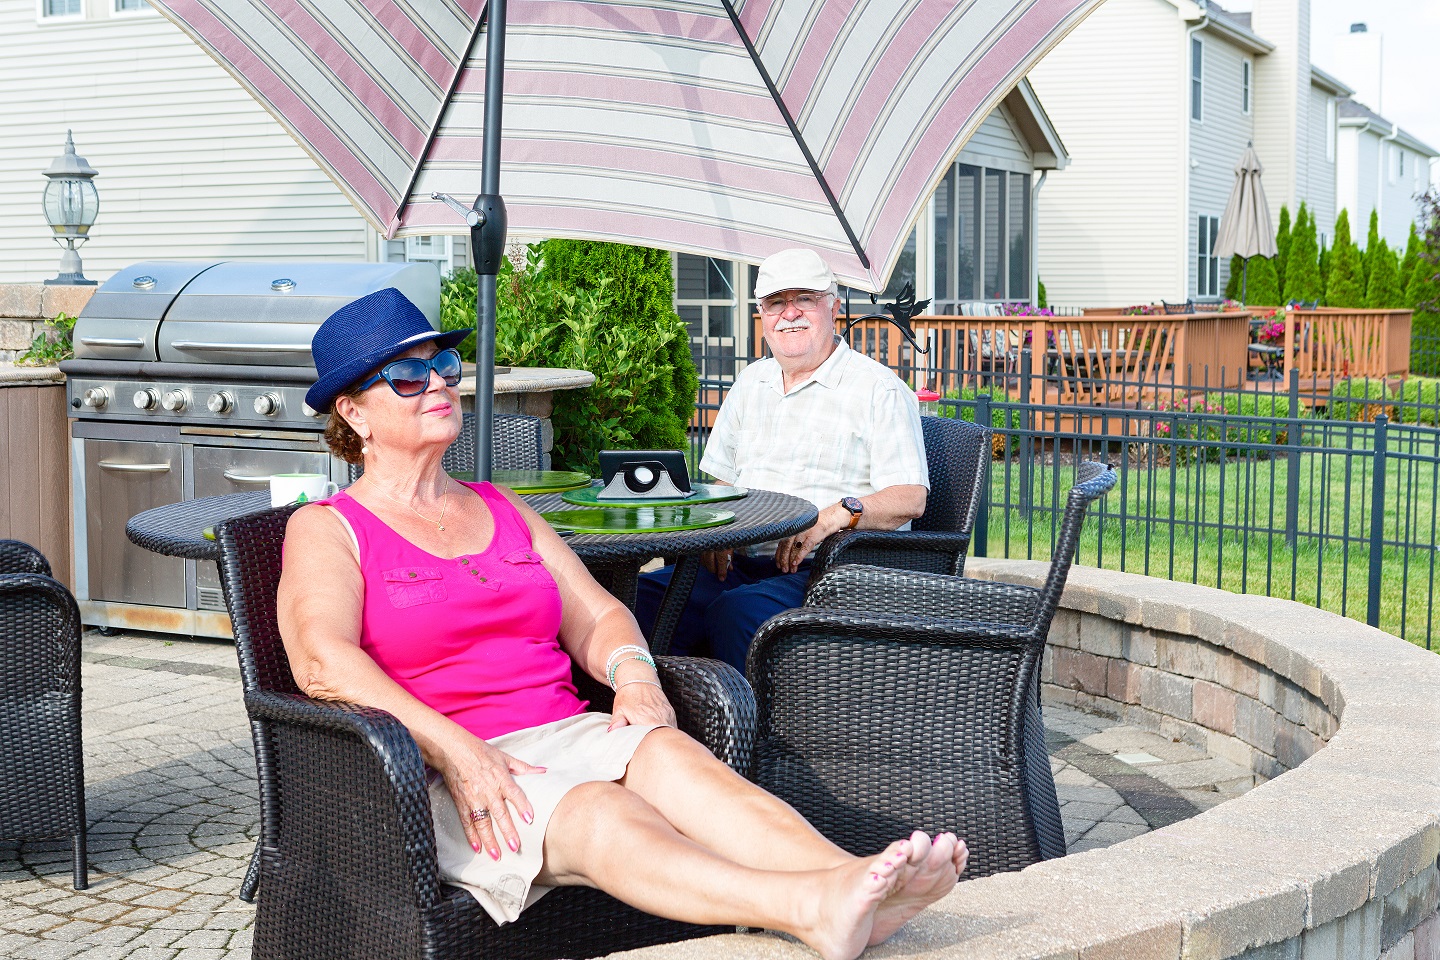 Elderly couple relaxing on an upmarket paved circular patio in the hot summer sun chilling out and enjoying the vacation in a comfortable armchair